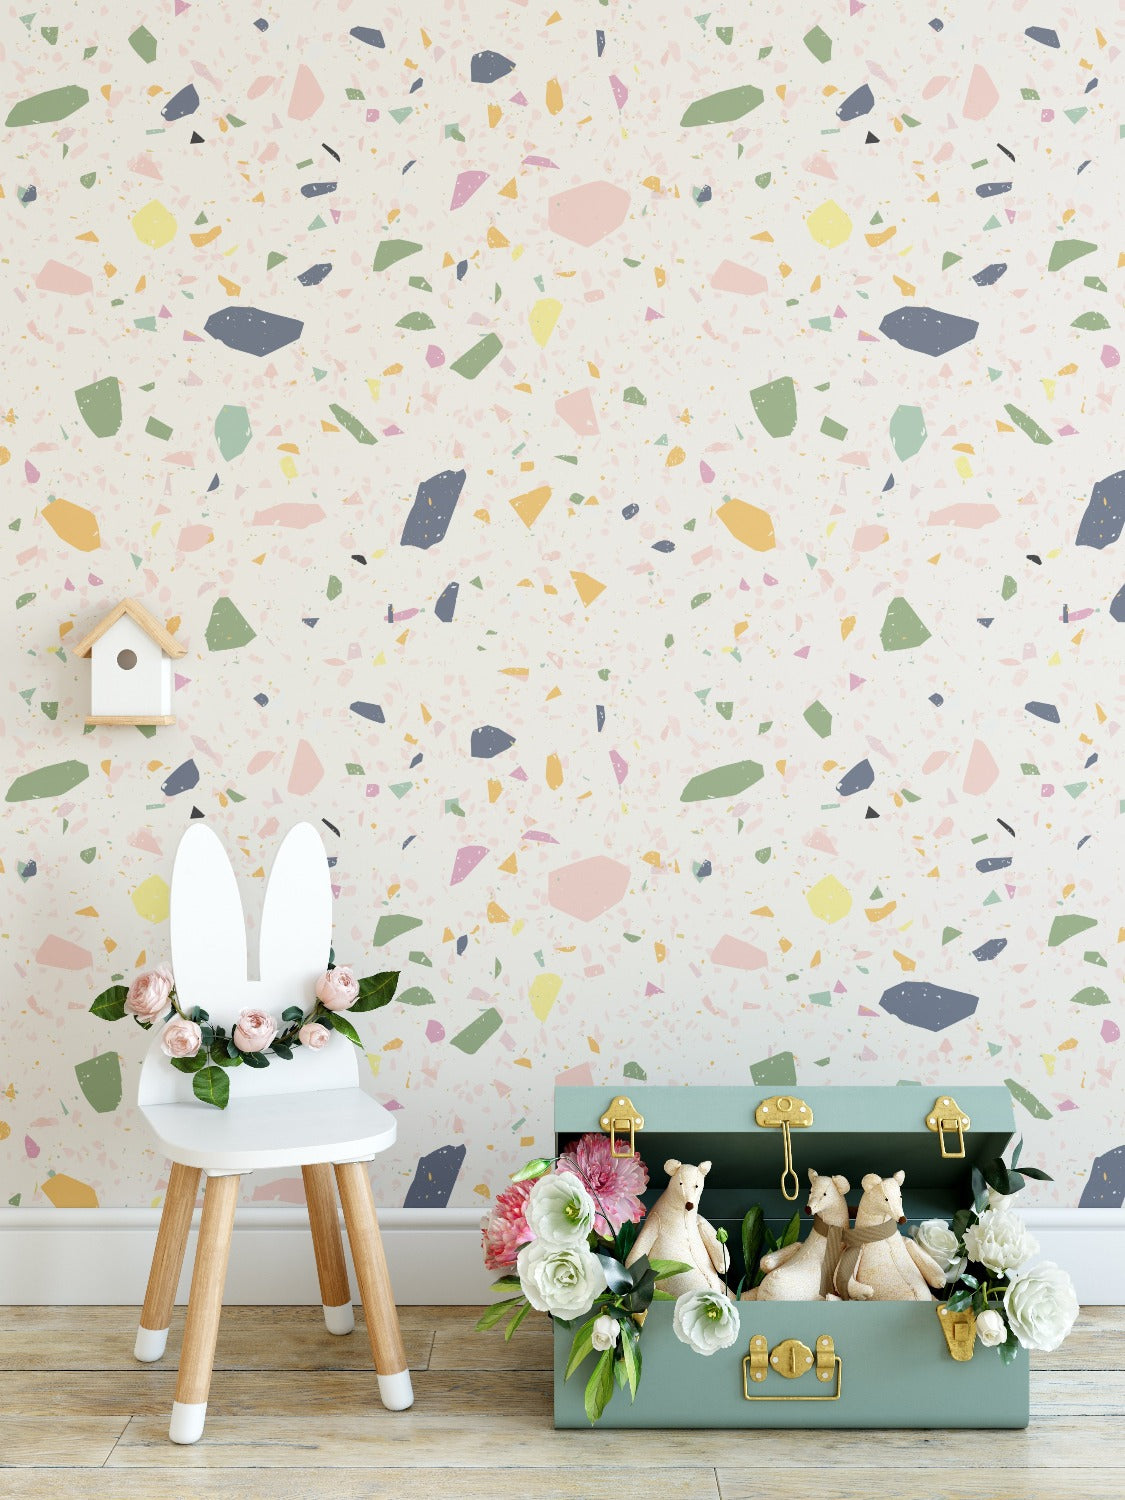 A styled children's room corner with the Cotton Candy Terrazzo wallpaper in the background, adorned with pastel confetti-like patterns. In the foreground, there's a chair with rabbit ears and a storage suitcase with stuffed animal toys and floral decorations, contributing to a playful and inviting atmosphere.